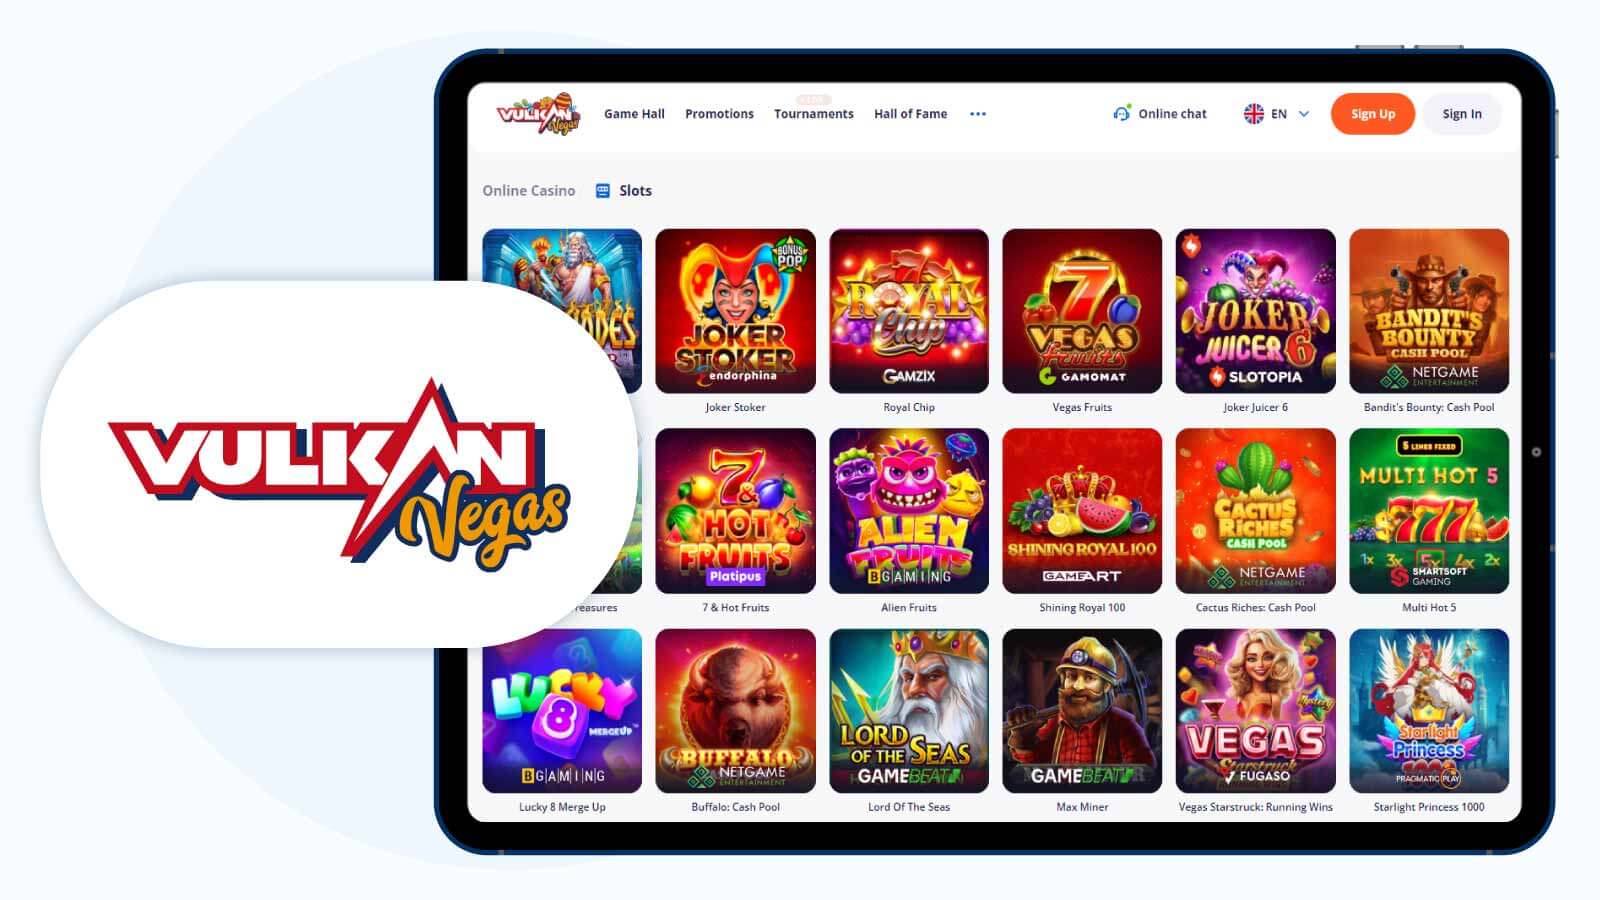 Vulkan Vegas Casino Best Casino For a High Number of Free Spins No Deposit Value